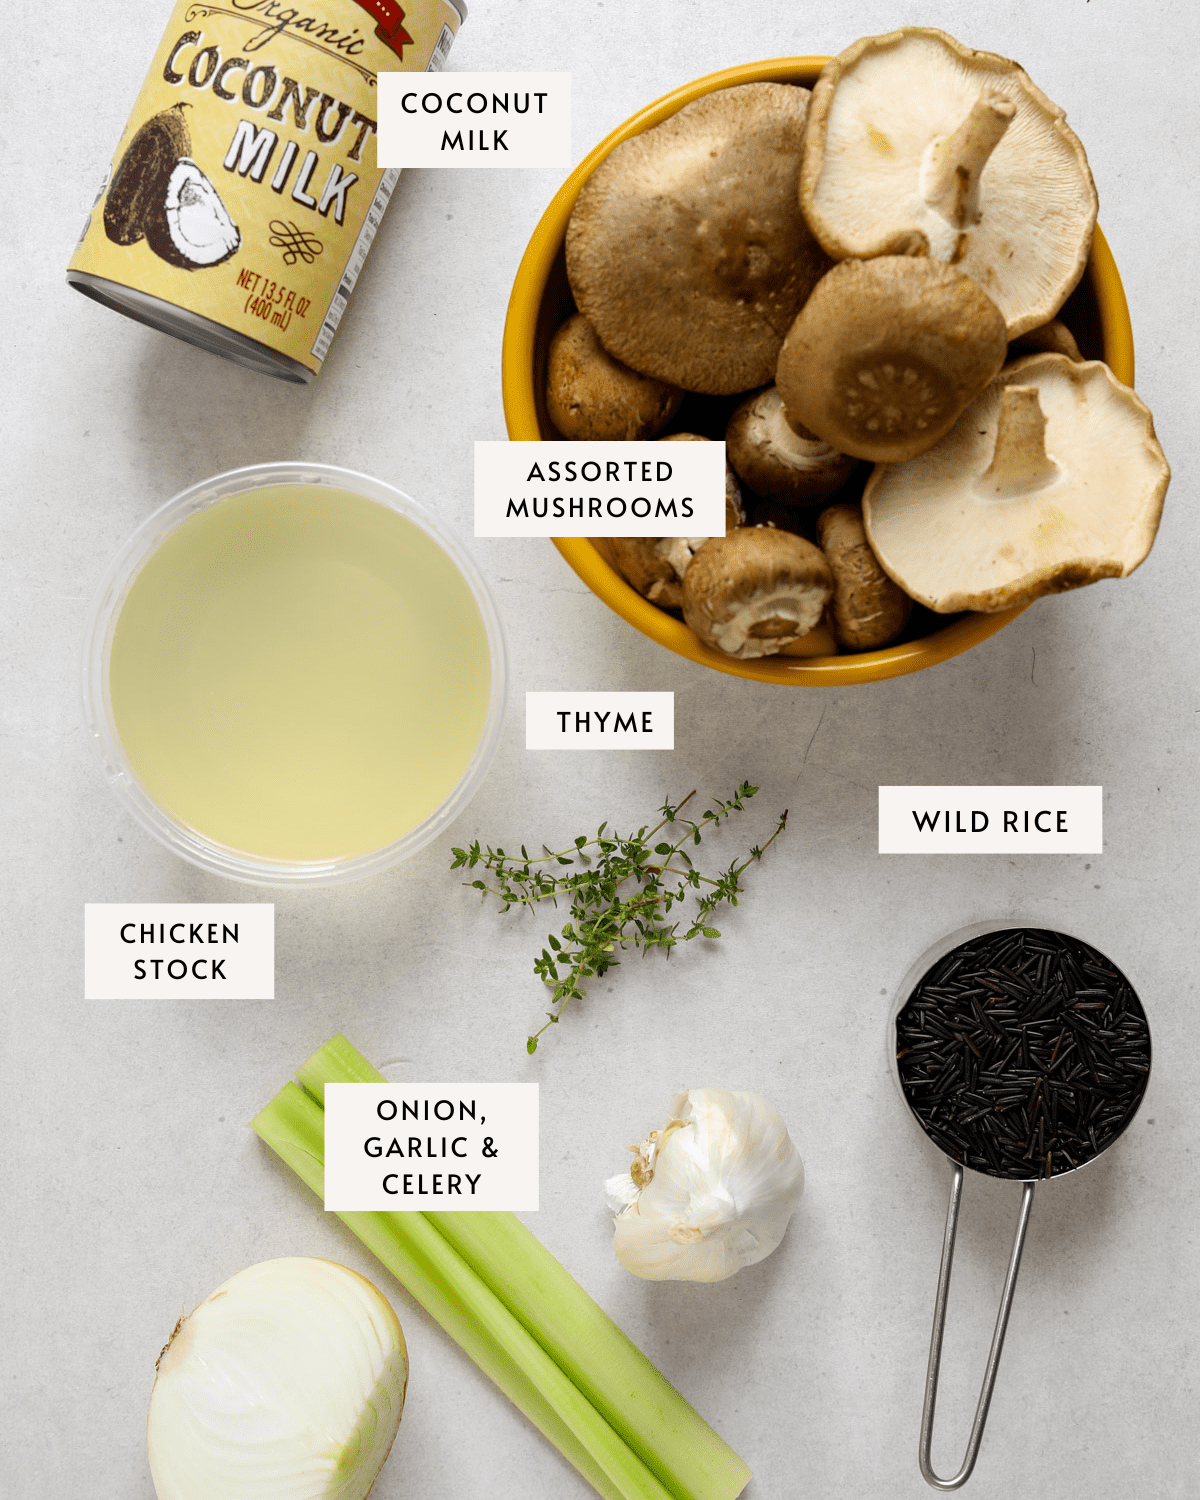 A can of coconut milk, a small plastic container of chicken stock, a measuring cup with wild rice, a yellow bowl of assorted mushrooms, half and onion a head of garlic and a bundle of fresh thyme stems.